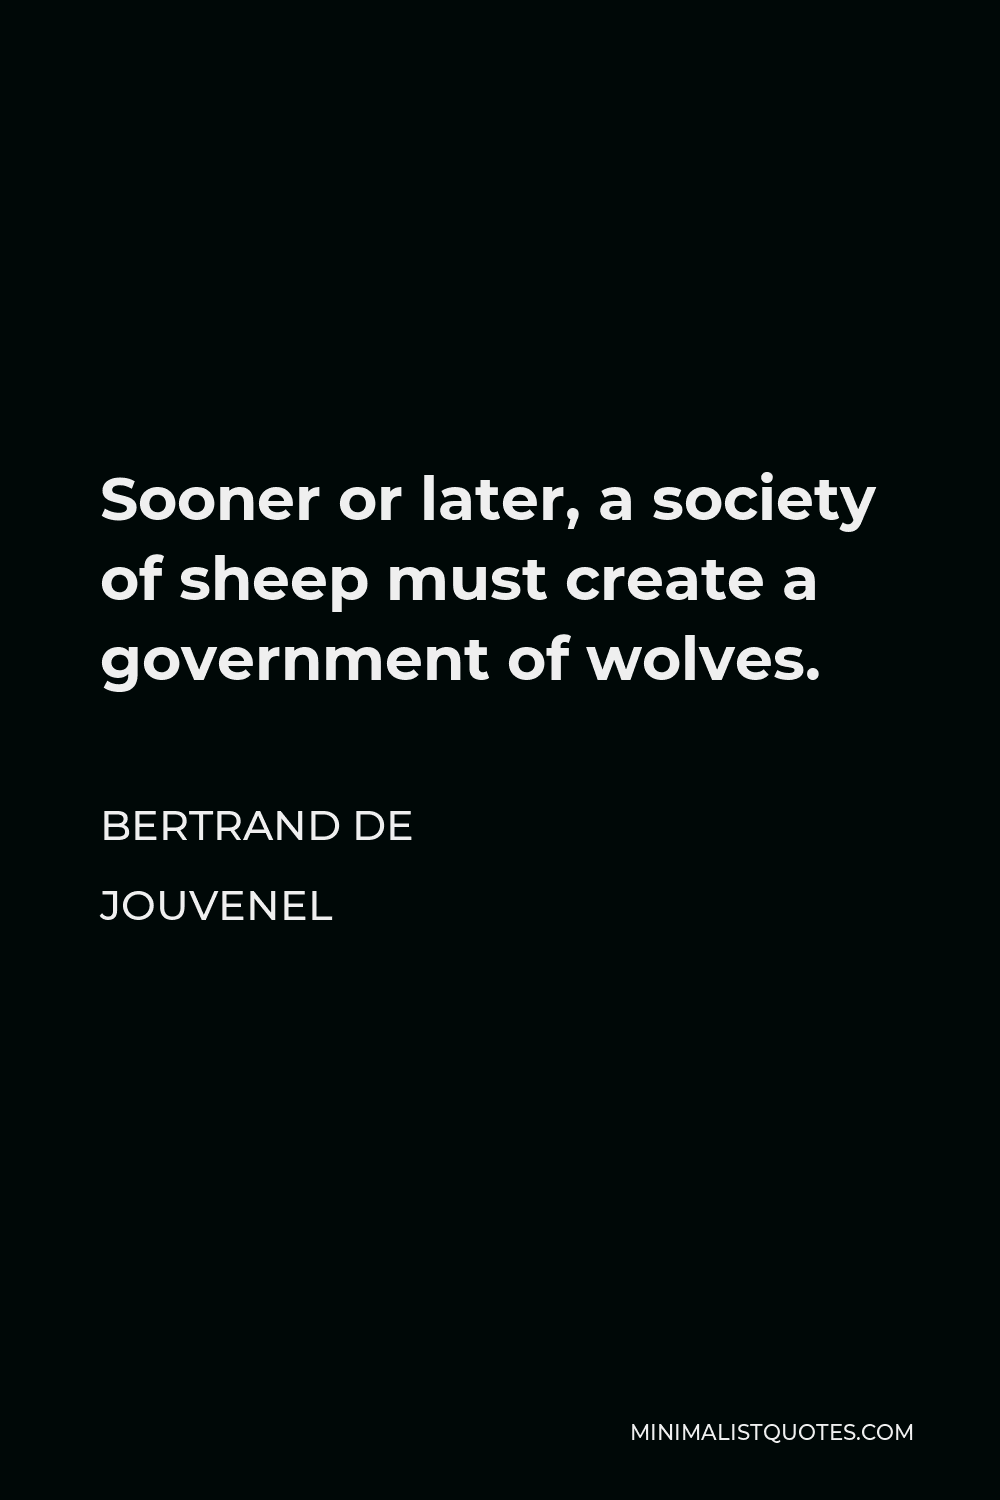 Bertrand de Jouvenel Quote - Sooner or later, a society of sheep must create a government of wolves.